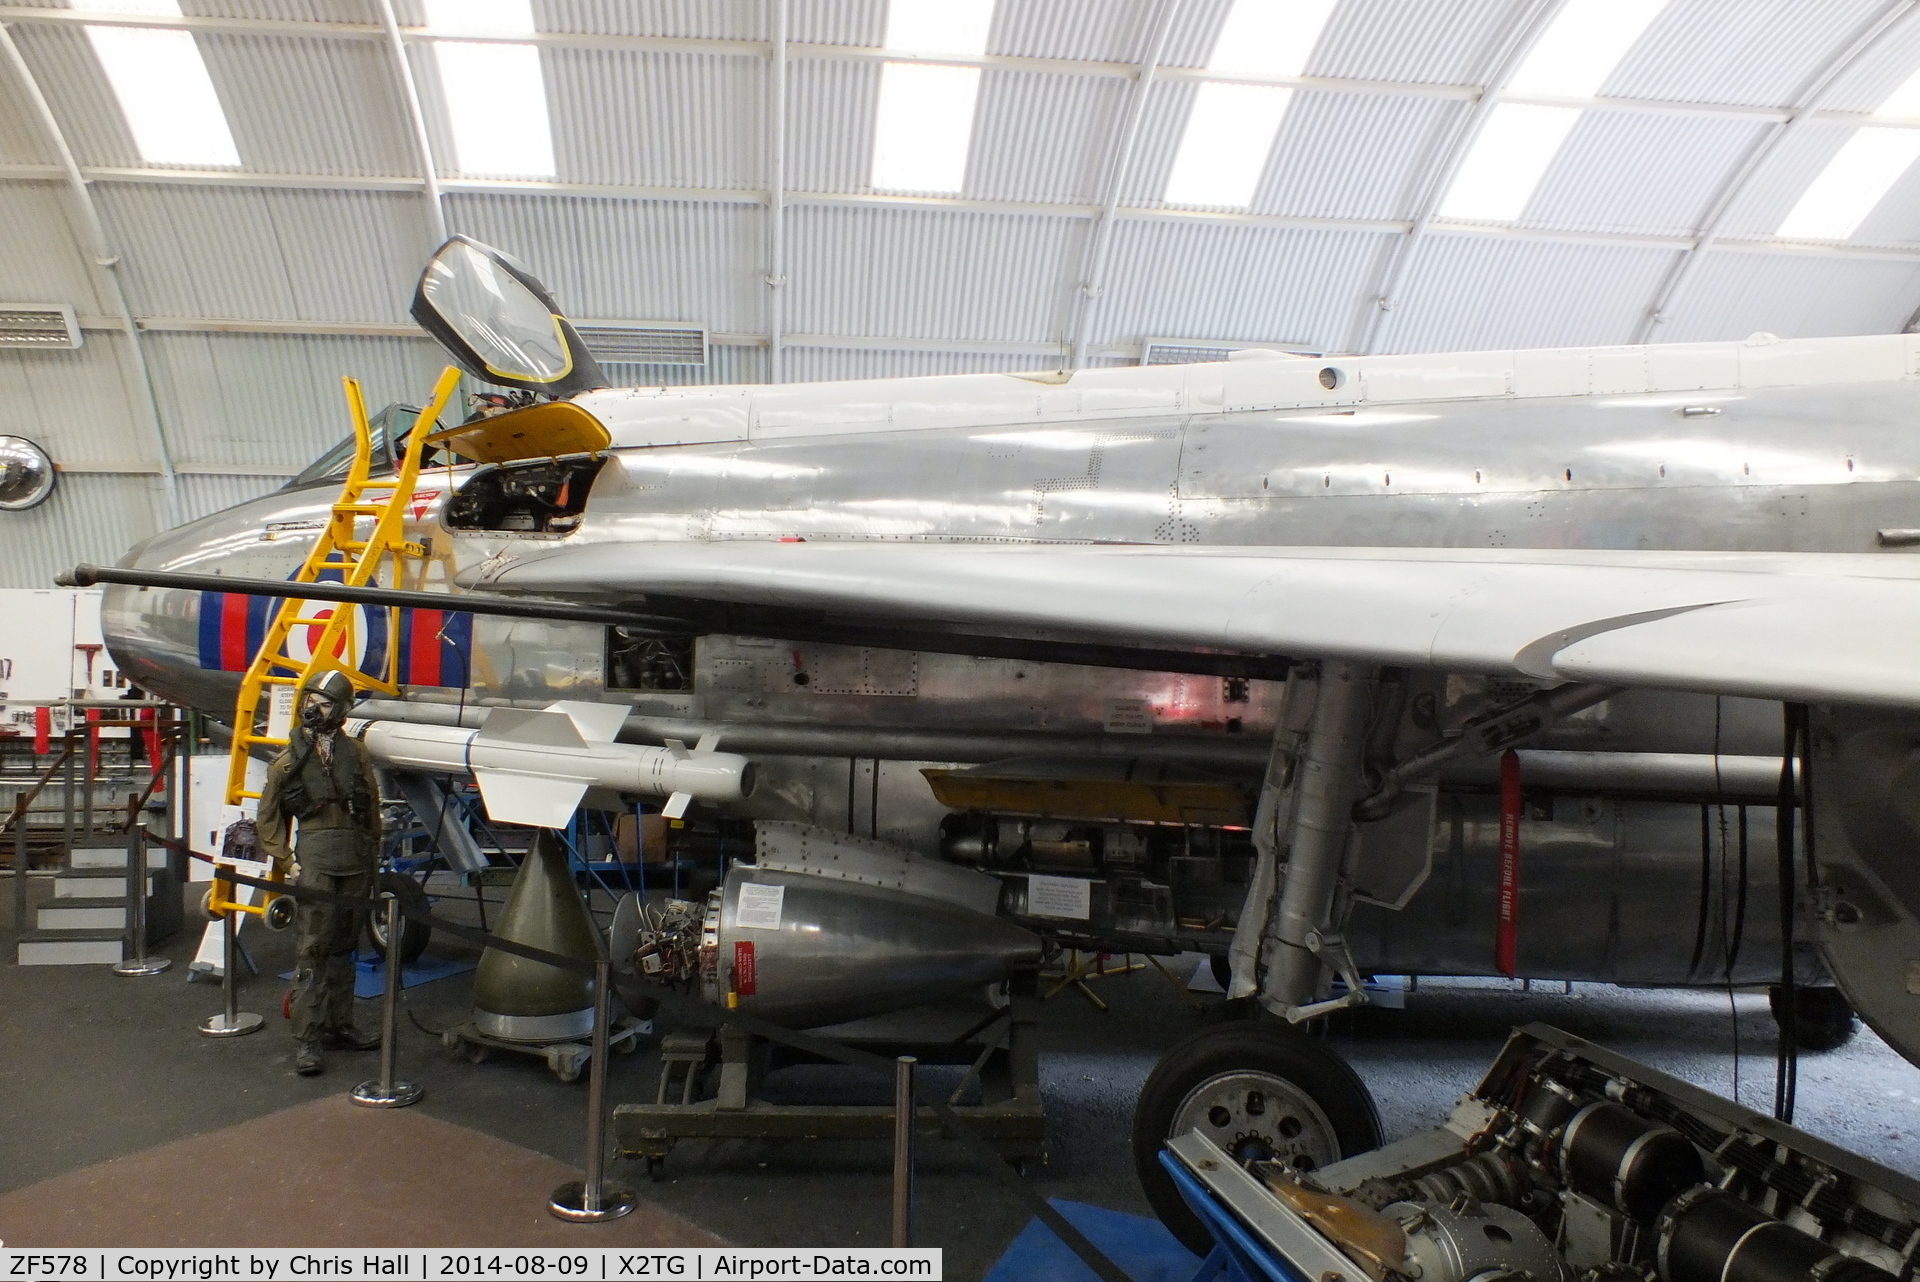 ZF578, 1968 English Electric Lightning F.53 C/N 95275, at the Tangmere Military Aviation Museum